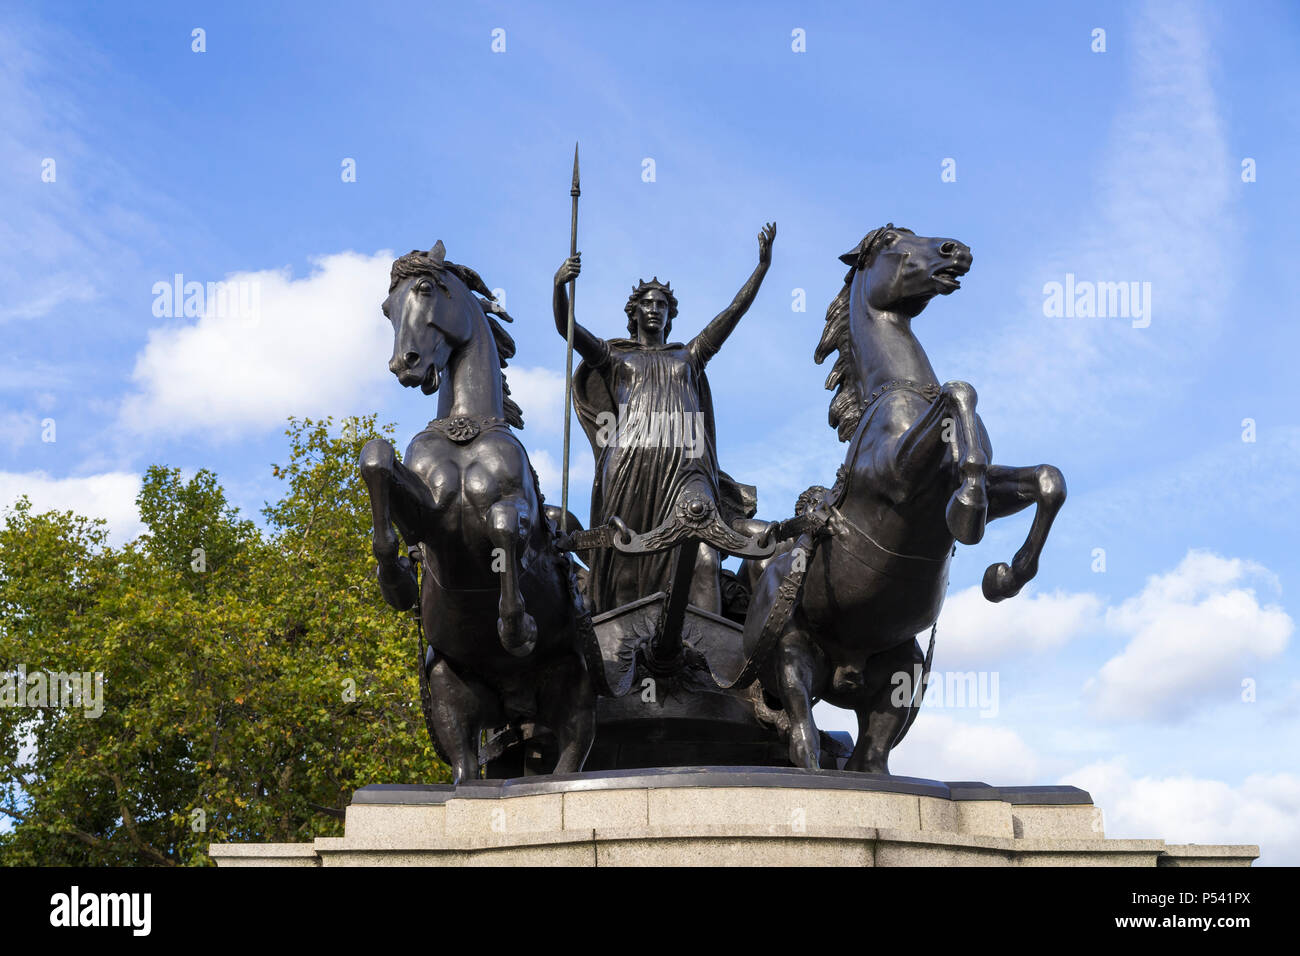 London Great Britain, October 12 2017, Statue Boadicea and Her Daughters, Nice autumn day with blue sky Stock Photo